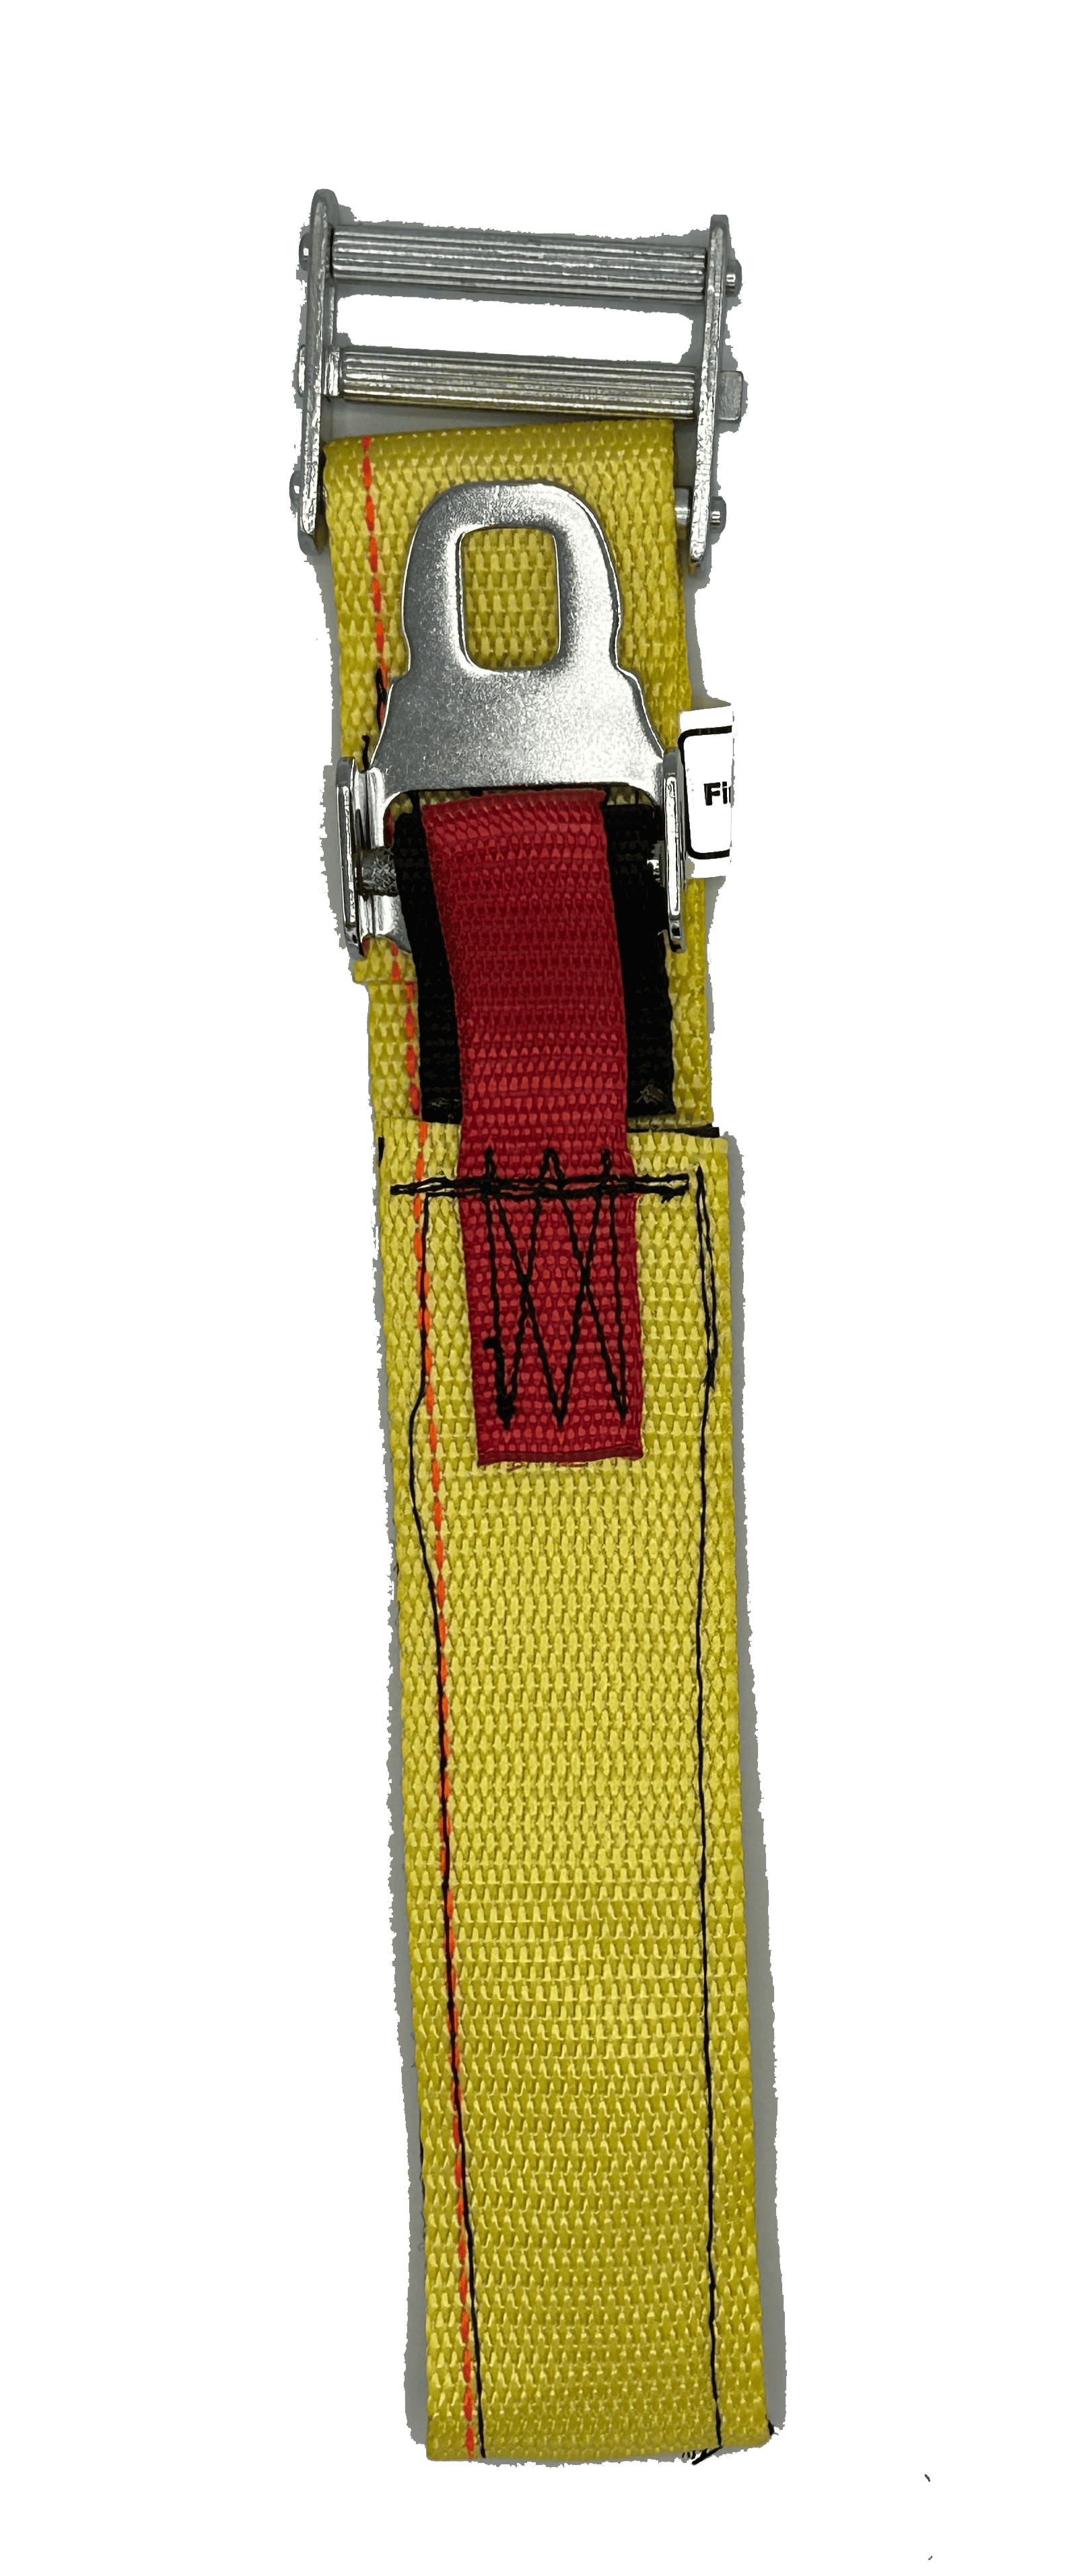 Firefighter Straps Inc. ETCS Tool Only, FFETCS-M, FFETCSS-M and FFETCSS-11C-M